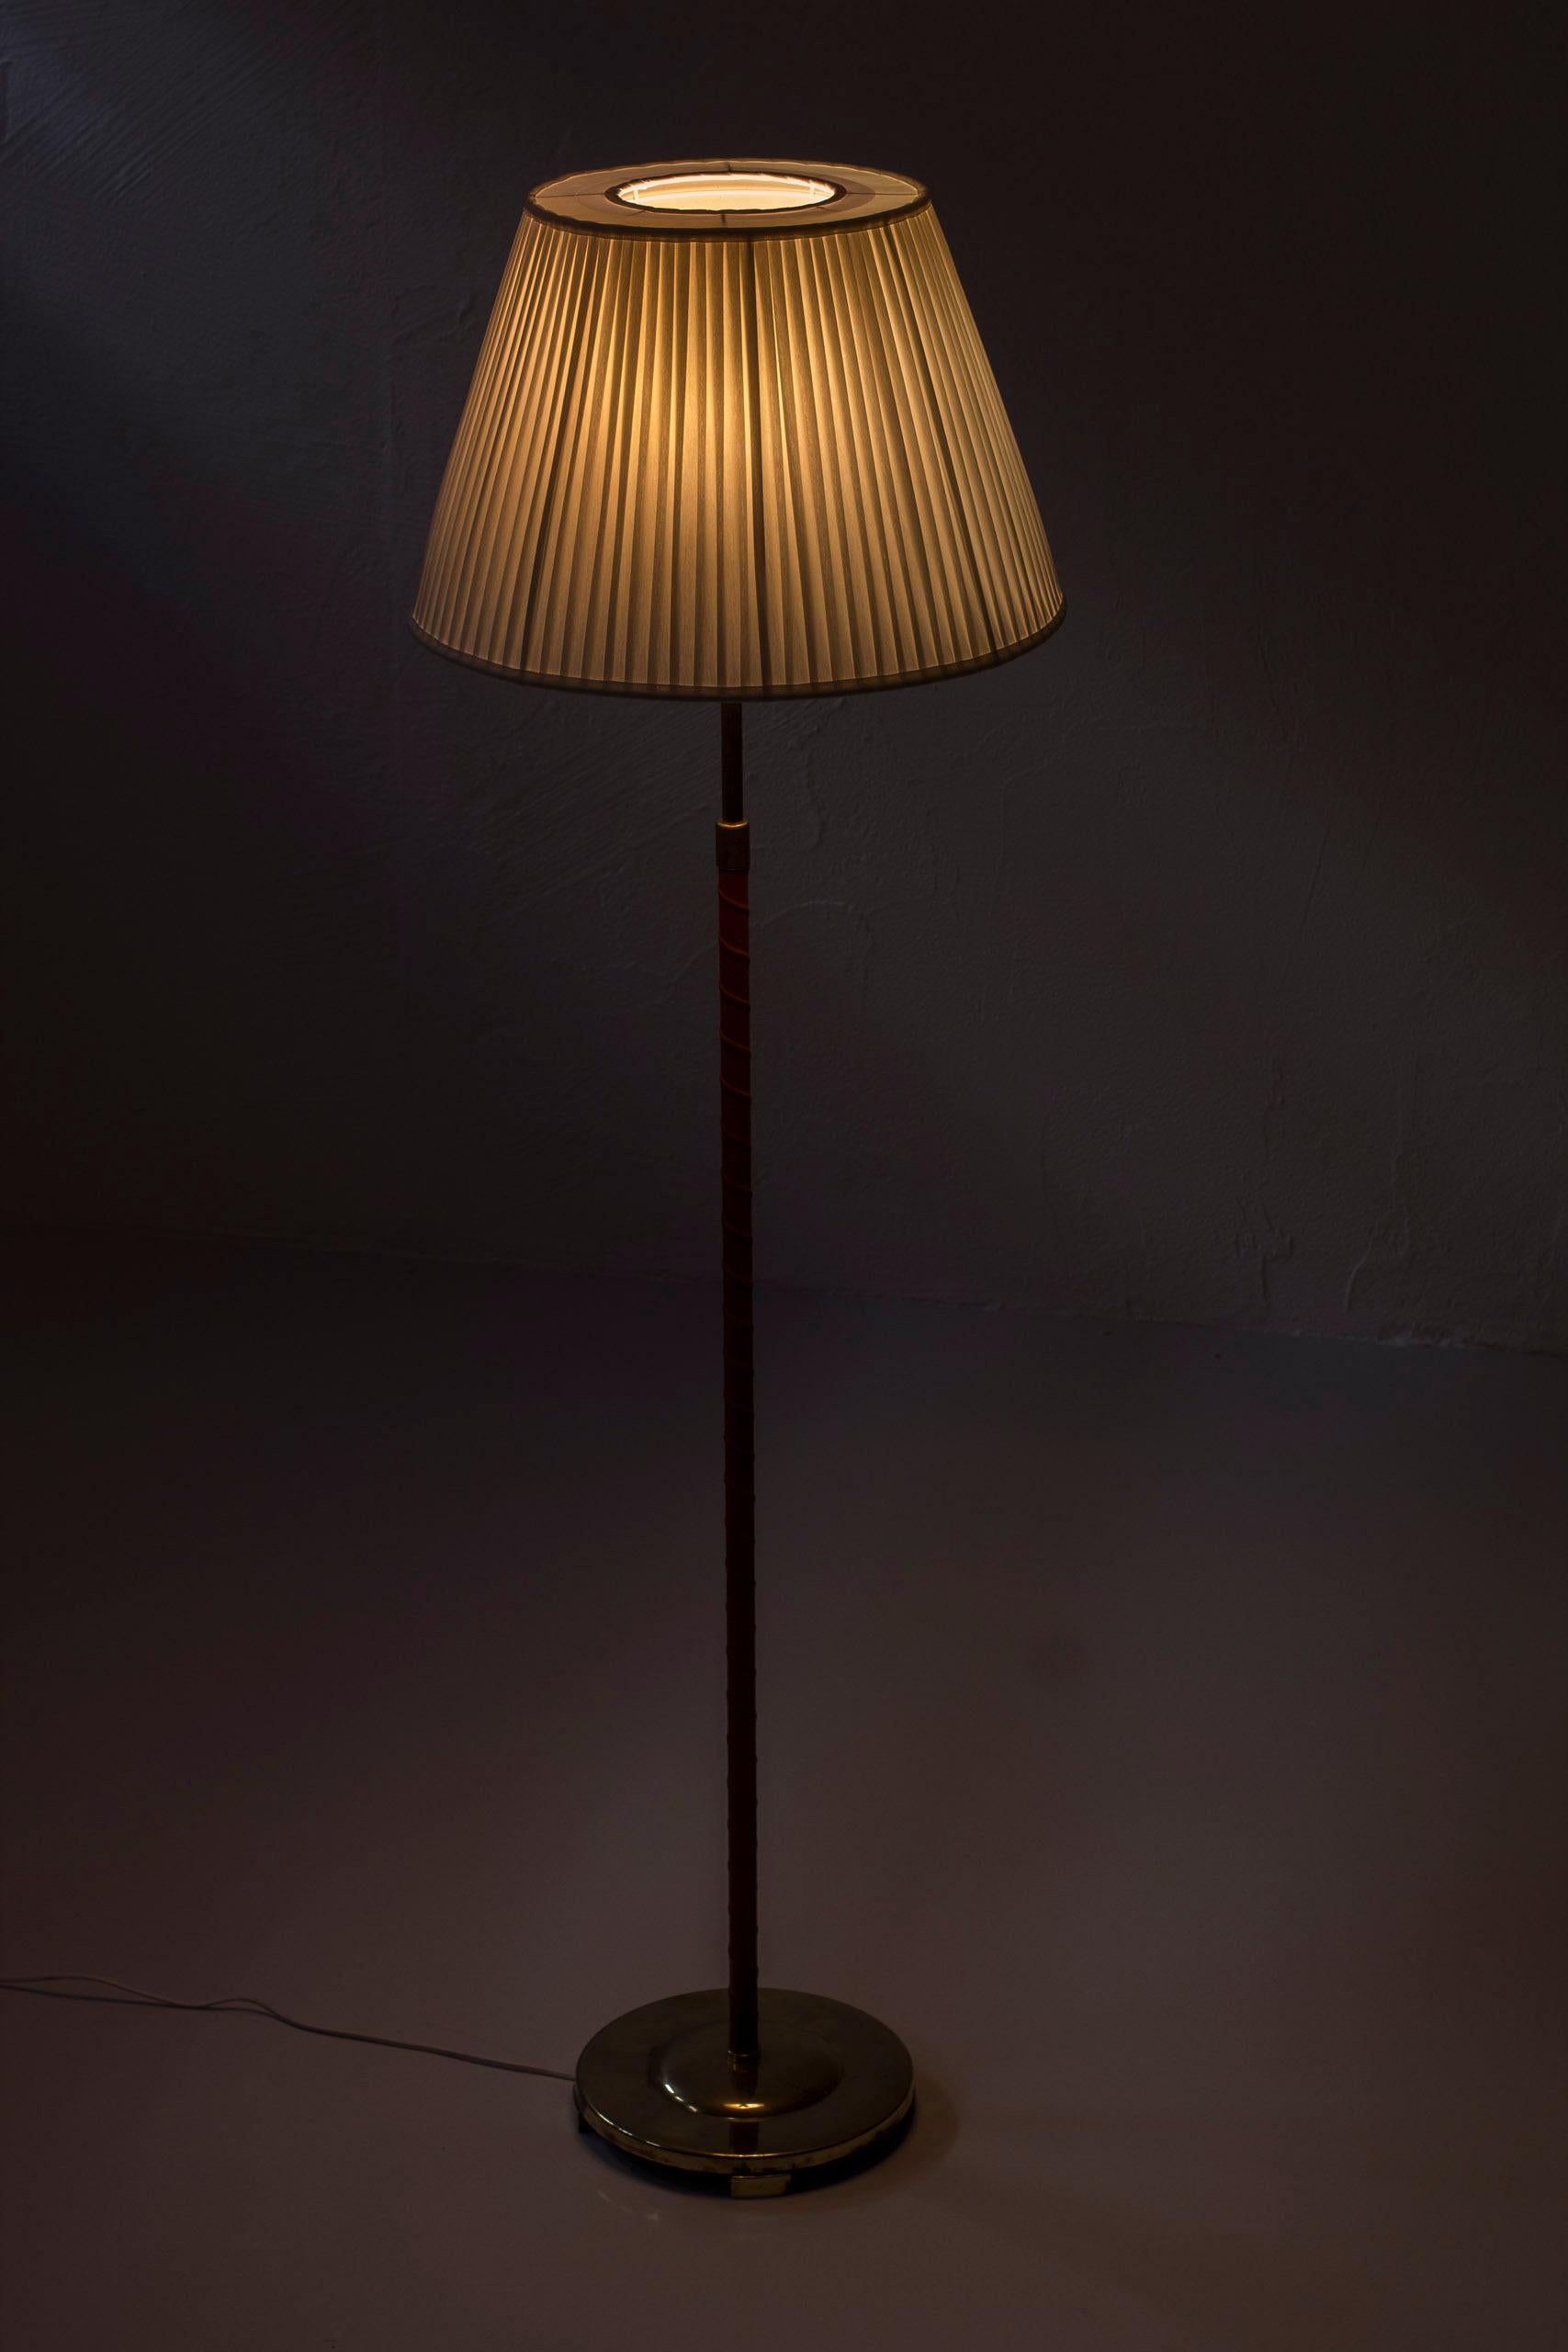 Metal Leather and Brass Floor Lamp by Bertil Brisborg for NK, Sweden, 1940s For Sale